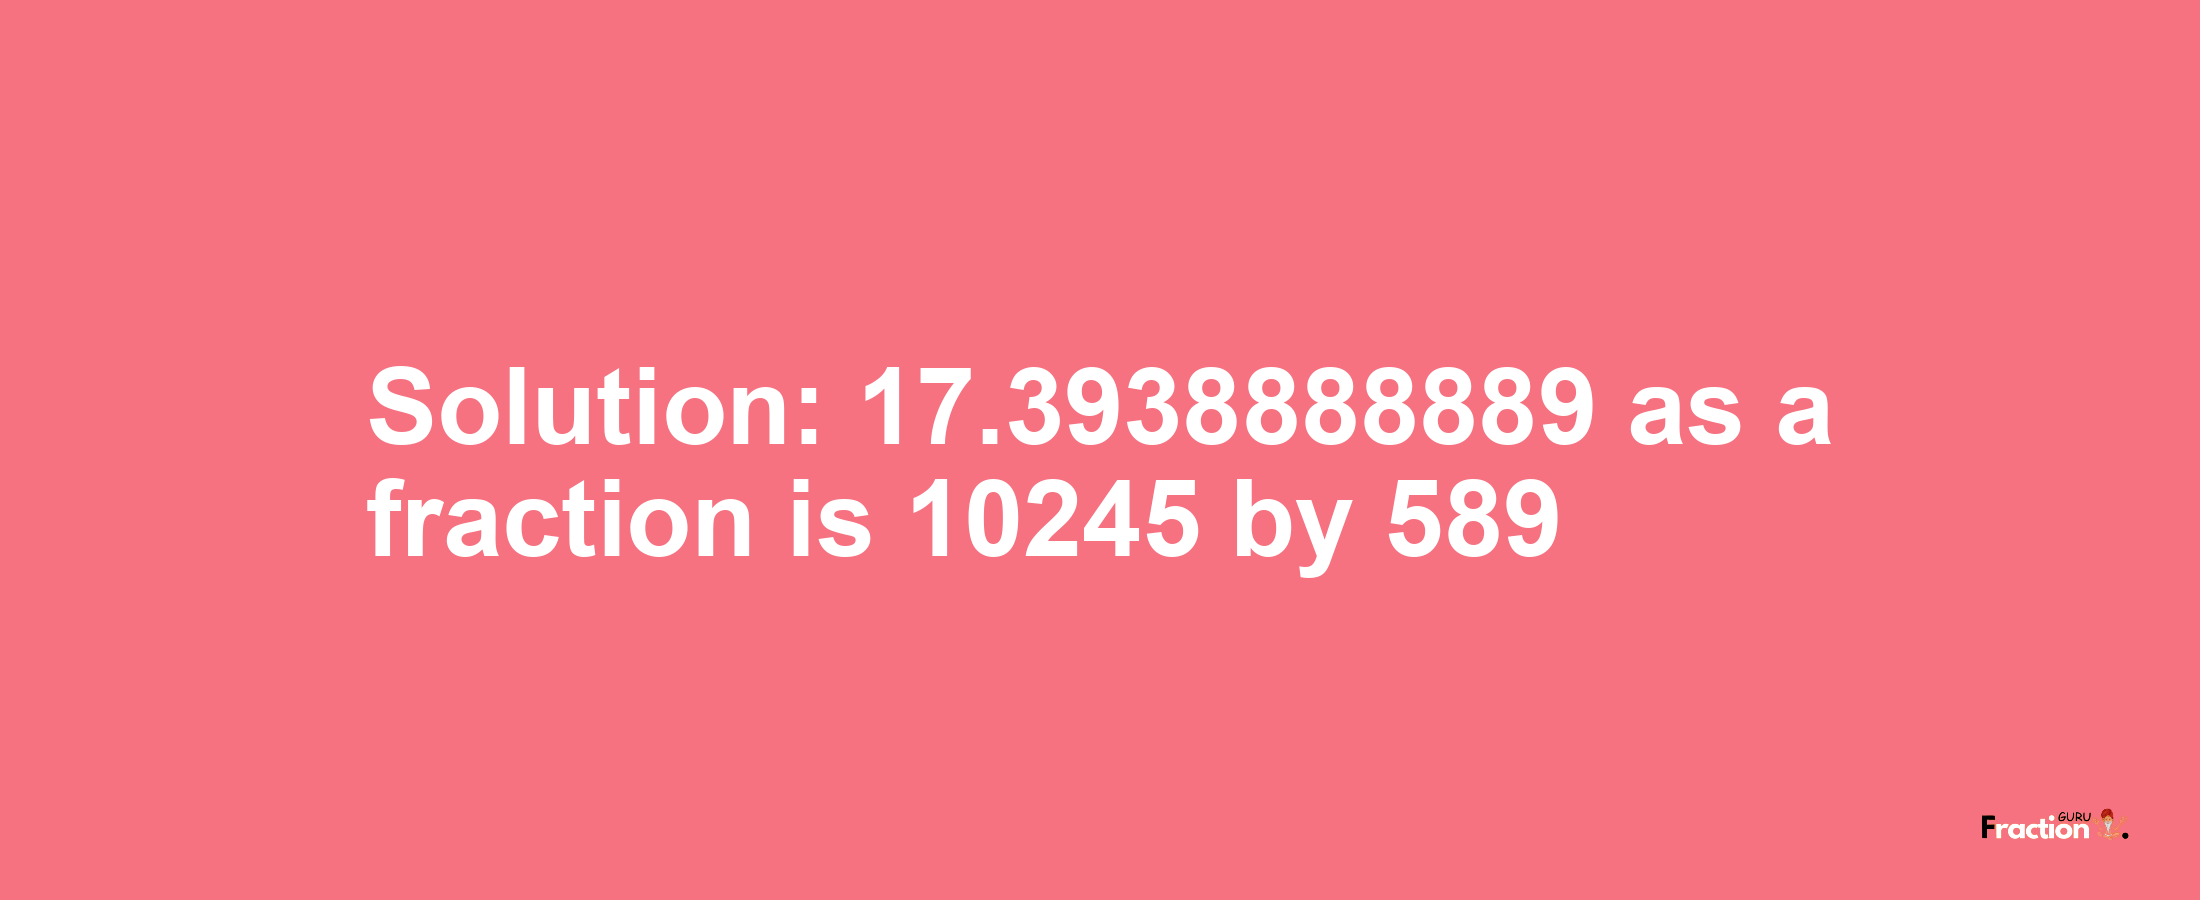 Solution:17.3938888889 as a fraction is 10245/589